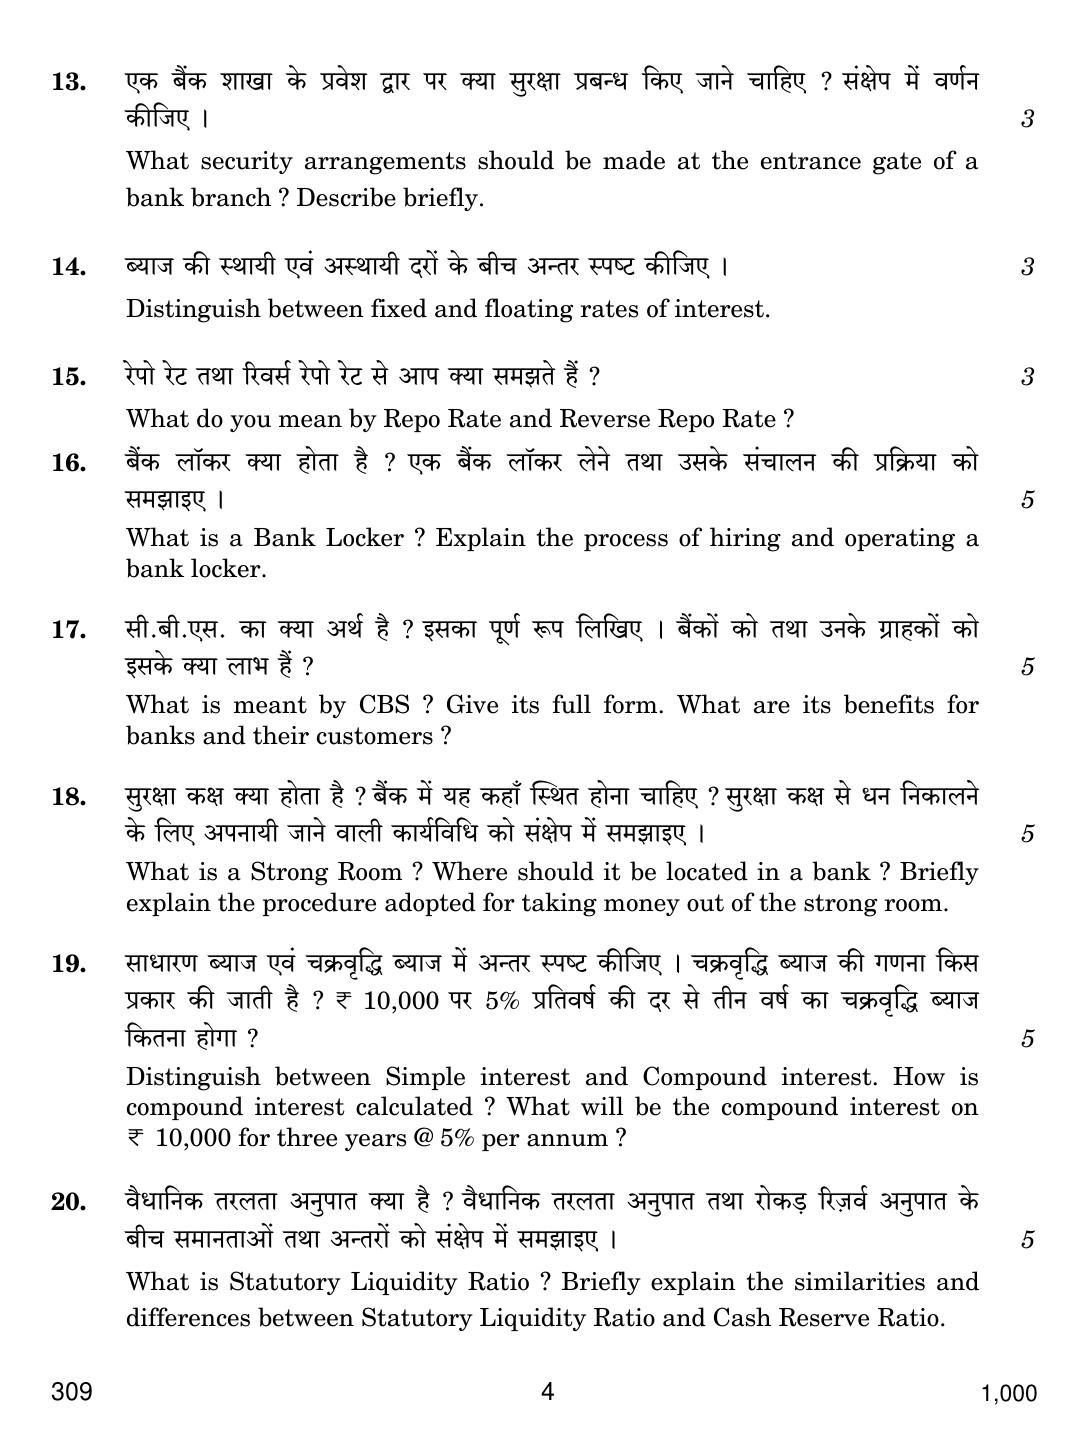 CBSE Class 12 309 BANKING 2018 Question Paper - Page 4